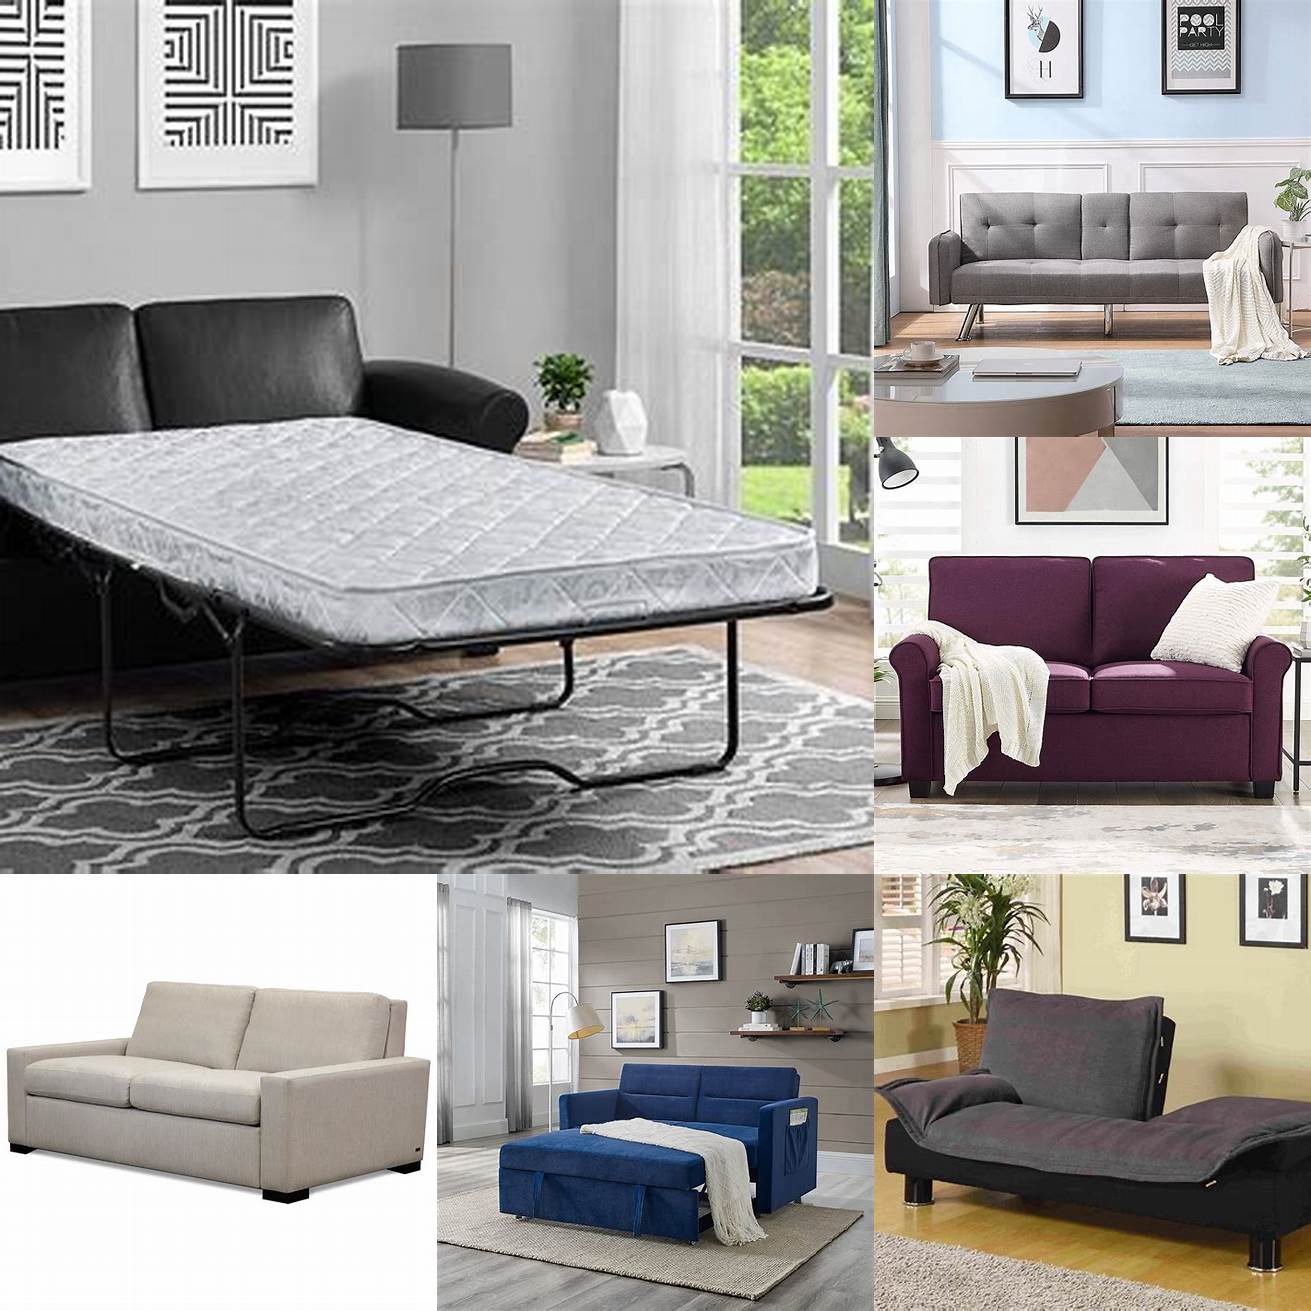 Style Full Sleeper Sofas come in a variety of styles so choose one that matches your decor